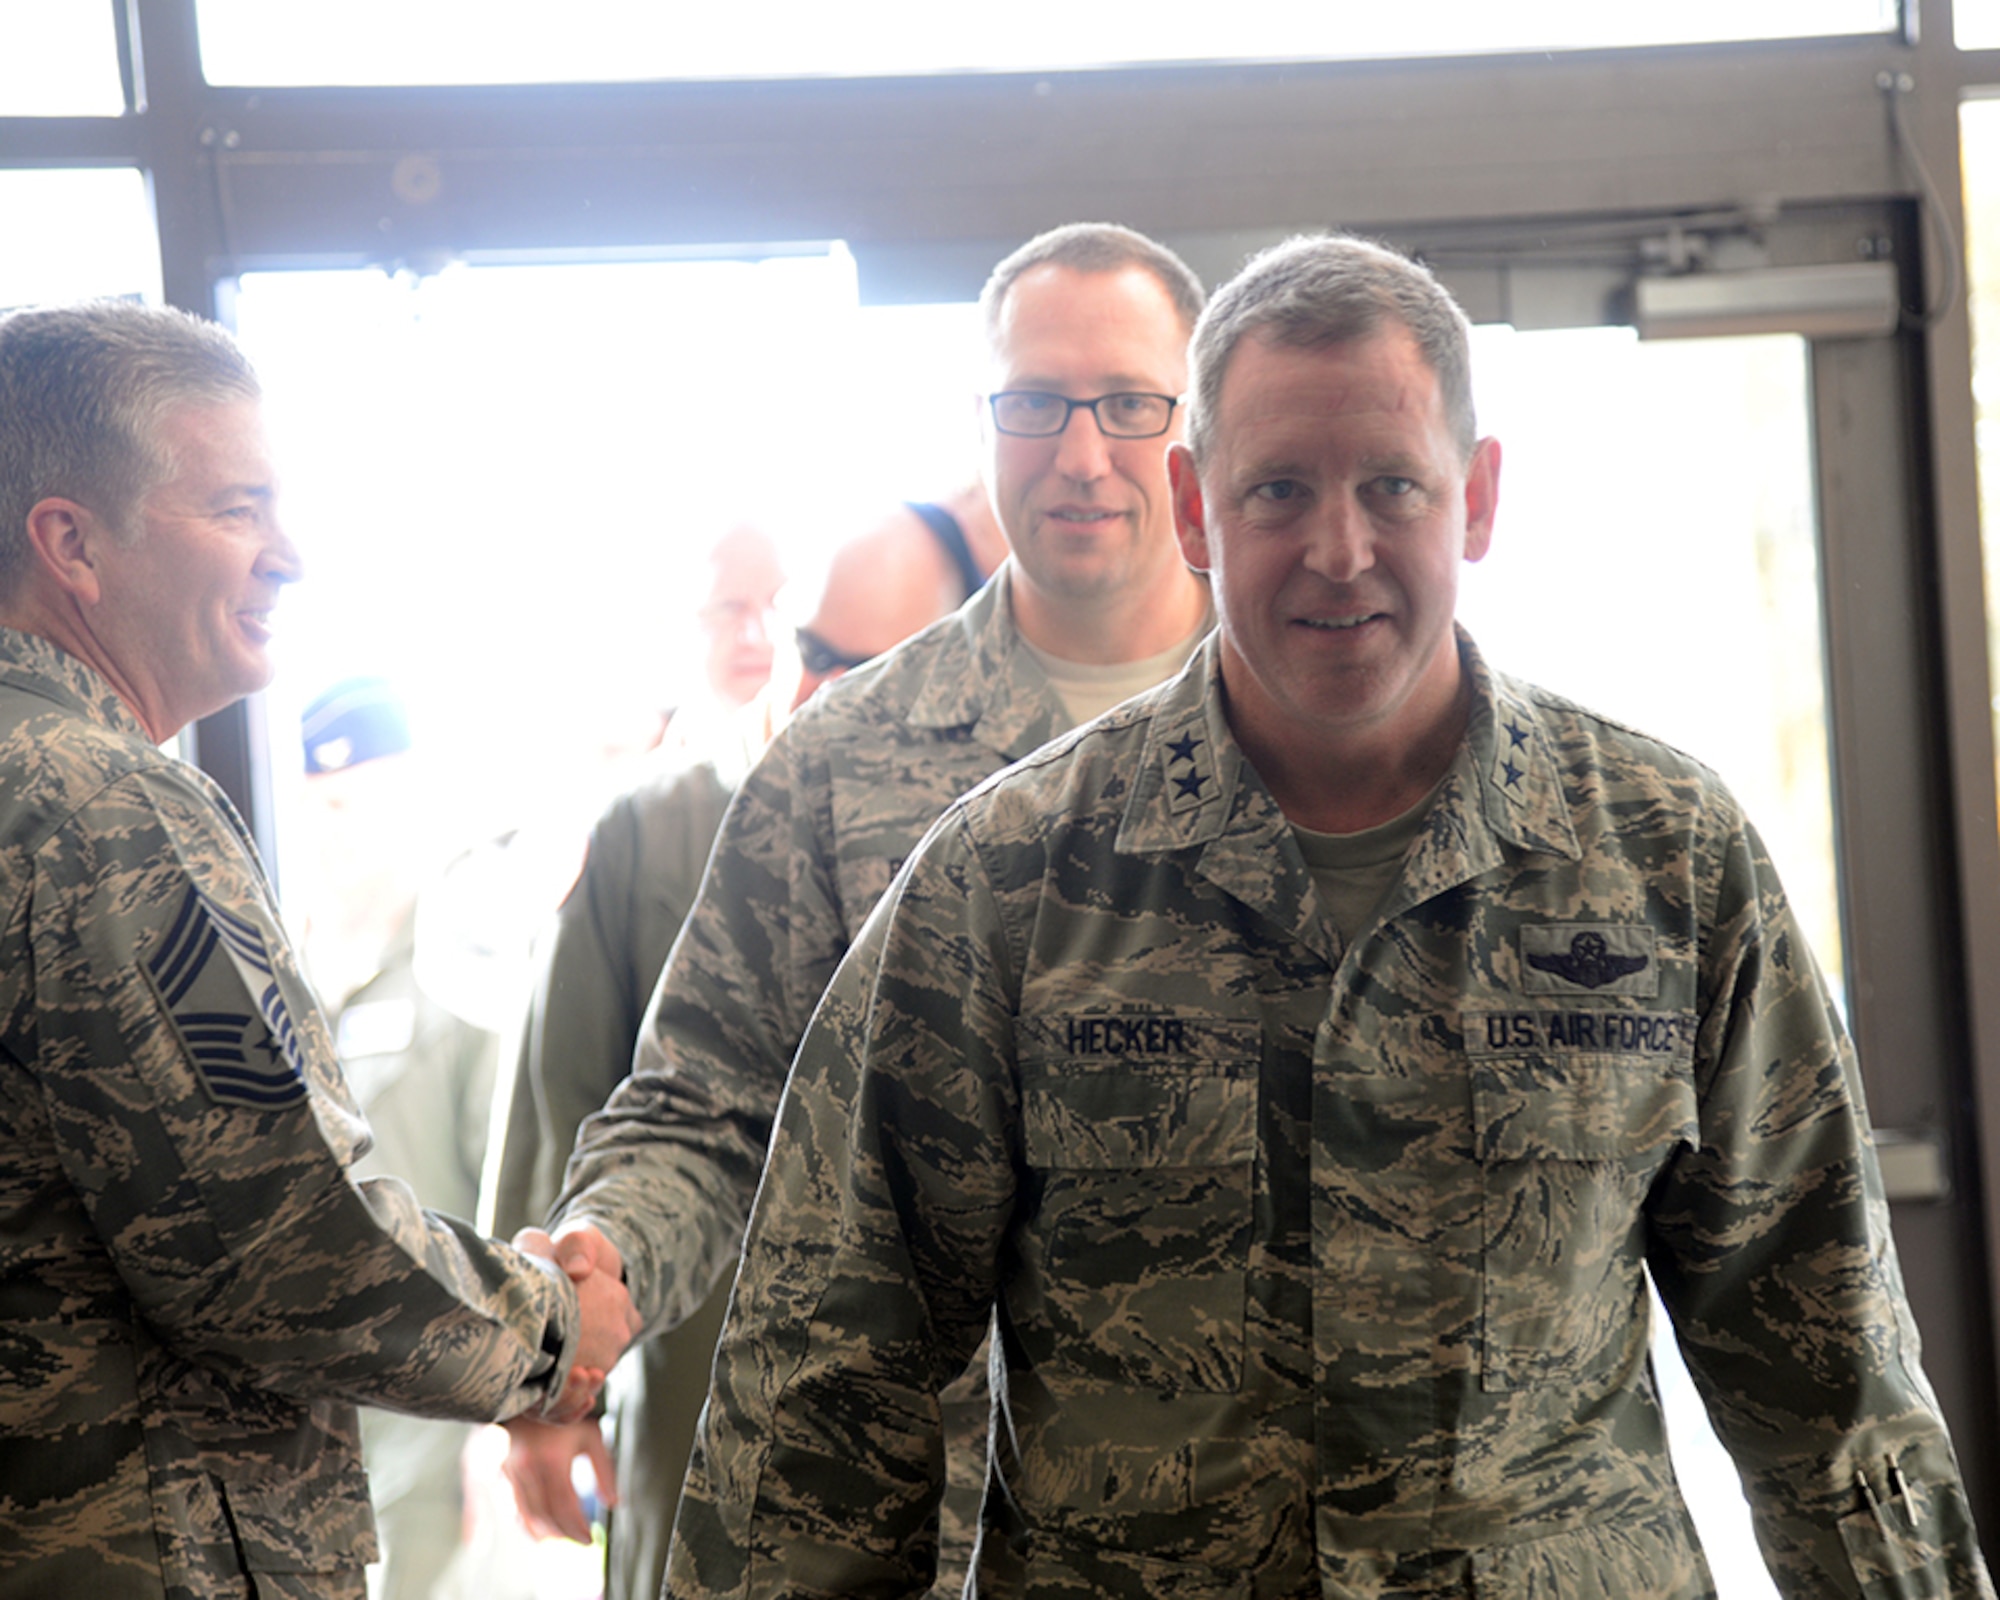 Maj. Gen. James Hecker, 19th Air Force commander, followed closely behind by Chief Master Sgt. Robert Boyer the 19th Air Force command chief, stop by the 149th Fighter Wing’s Operations Group, Dec. 10, during his visit to Joint Base San Antonio-Lackland, Texas. Boyer accompanied the general on his site visit to the wing. During the visit, both Air Force leaders, toured several units and reacquainted themselves with the people and mission of the 149th FW. 

